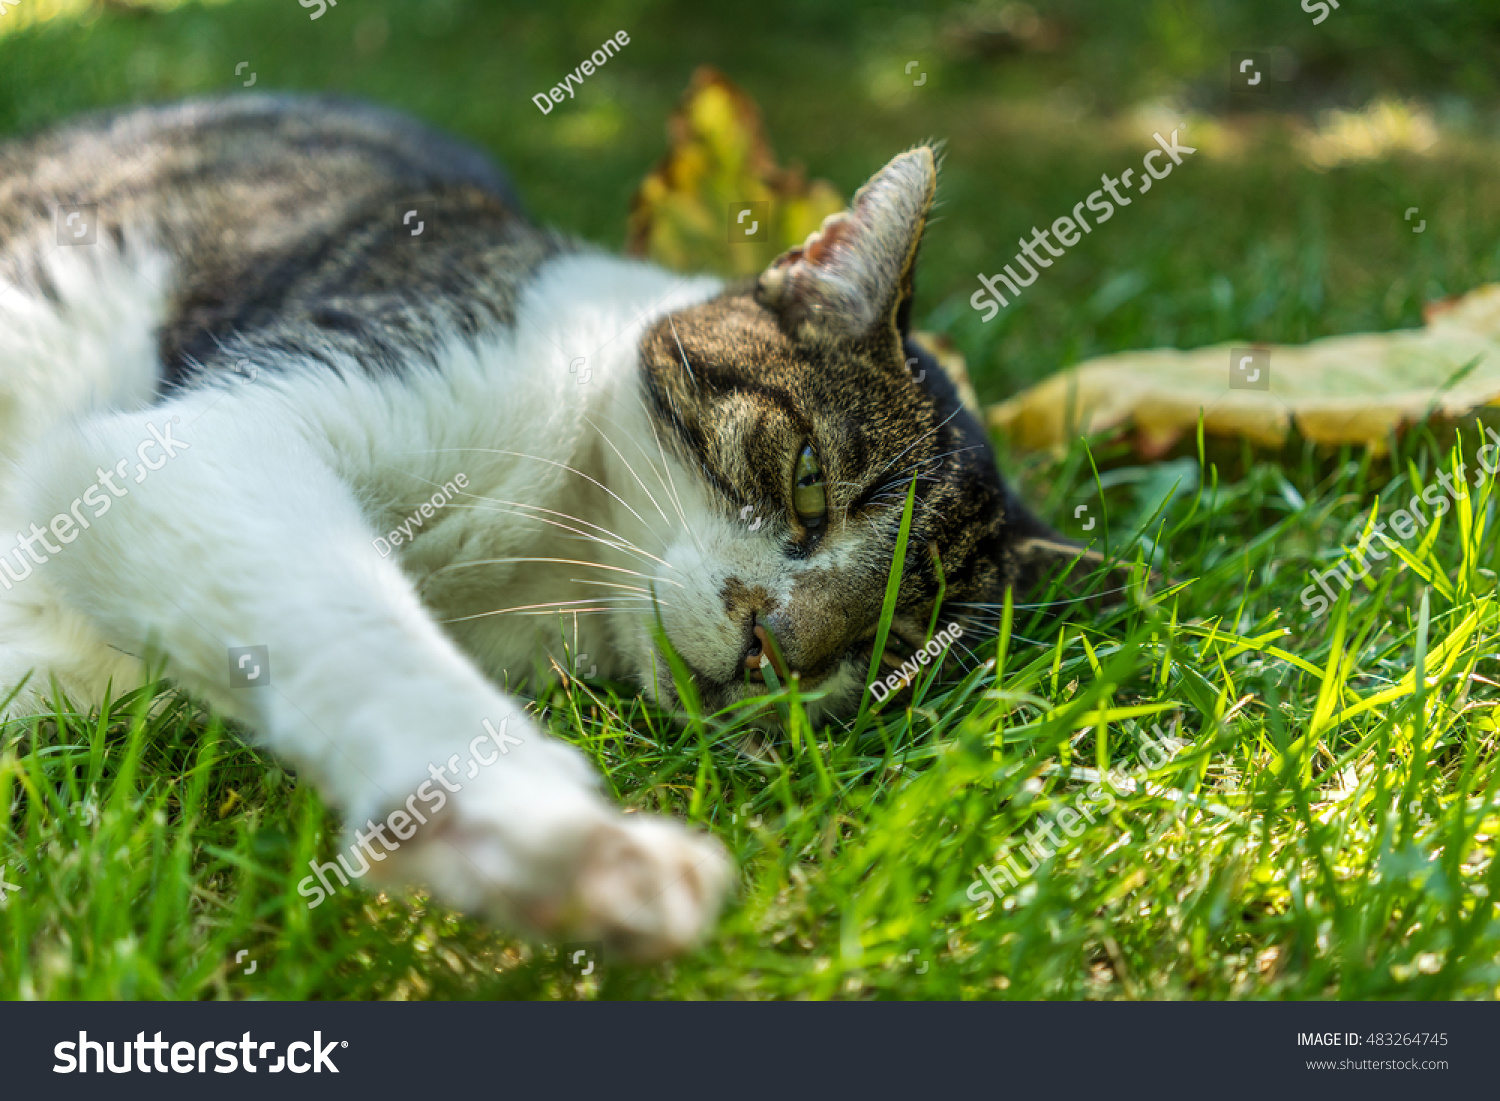 Cat on grass on a sunny day #483264745